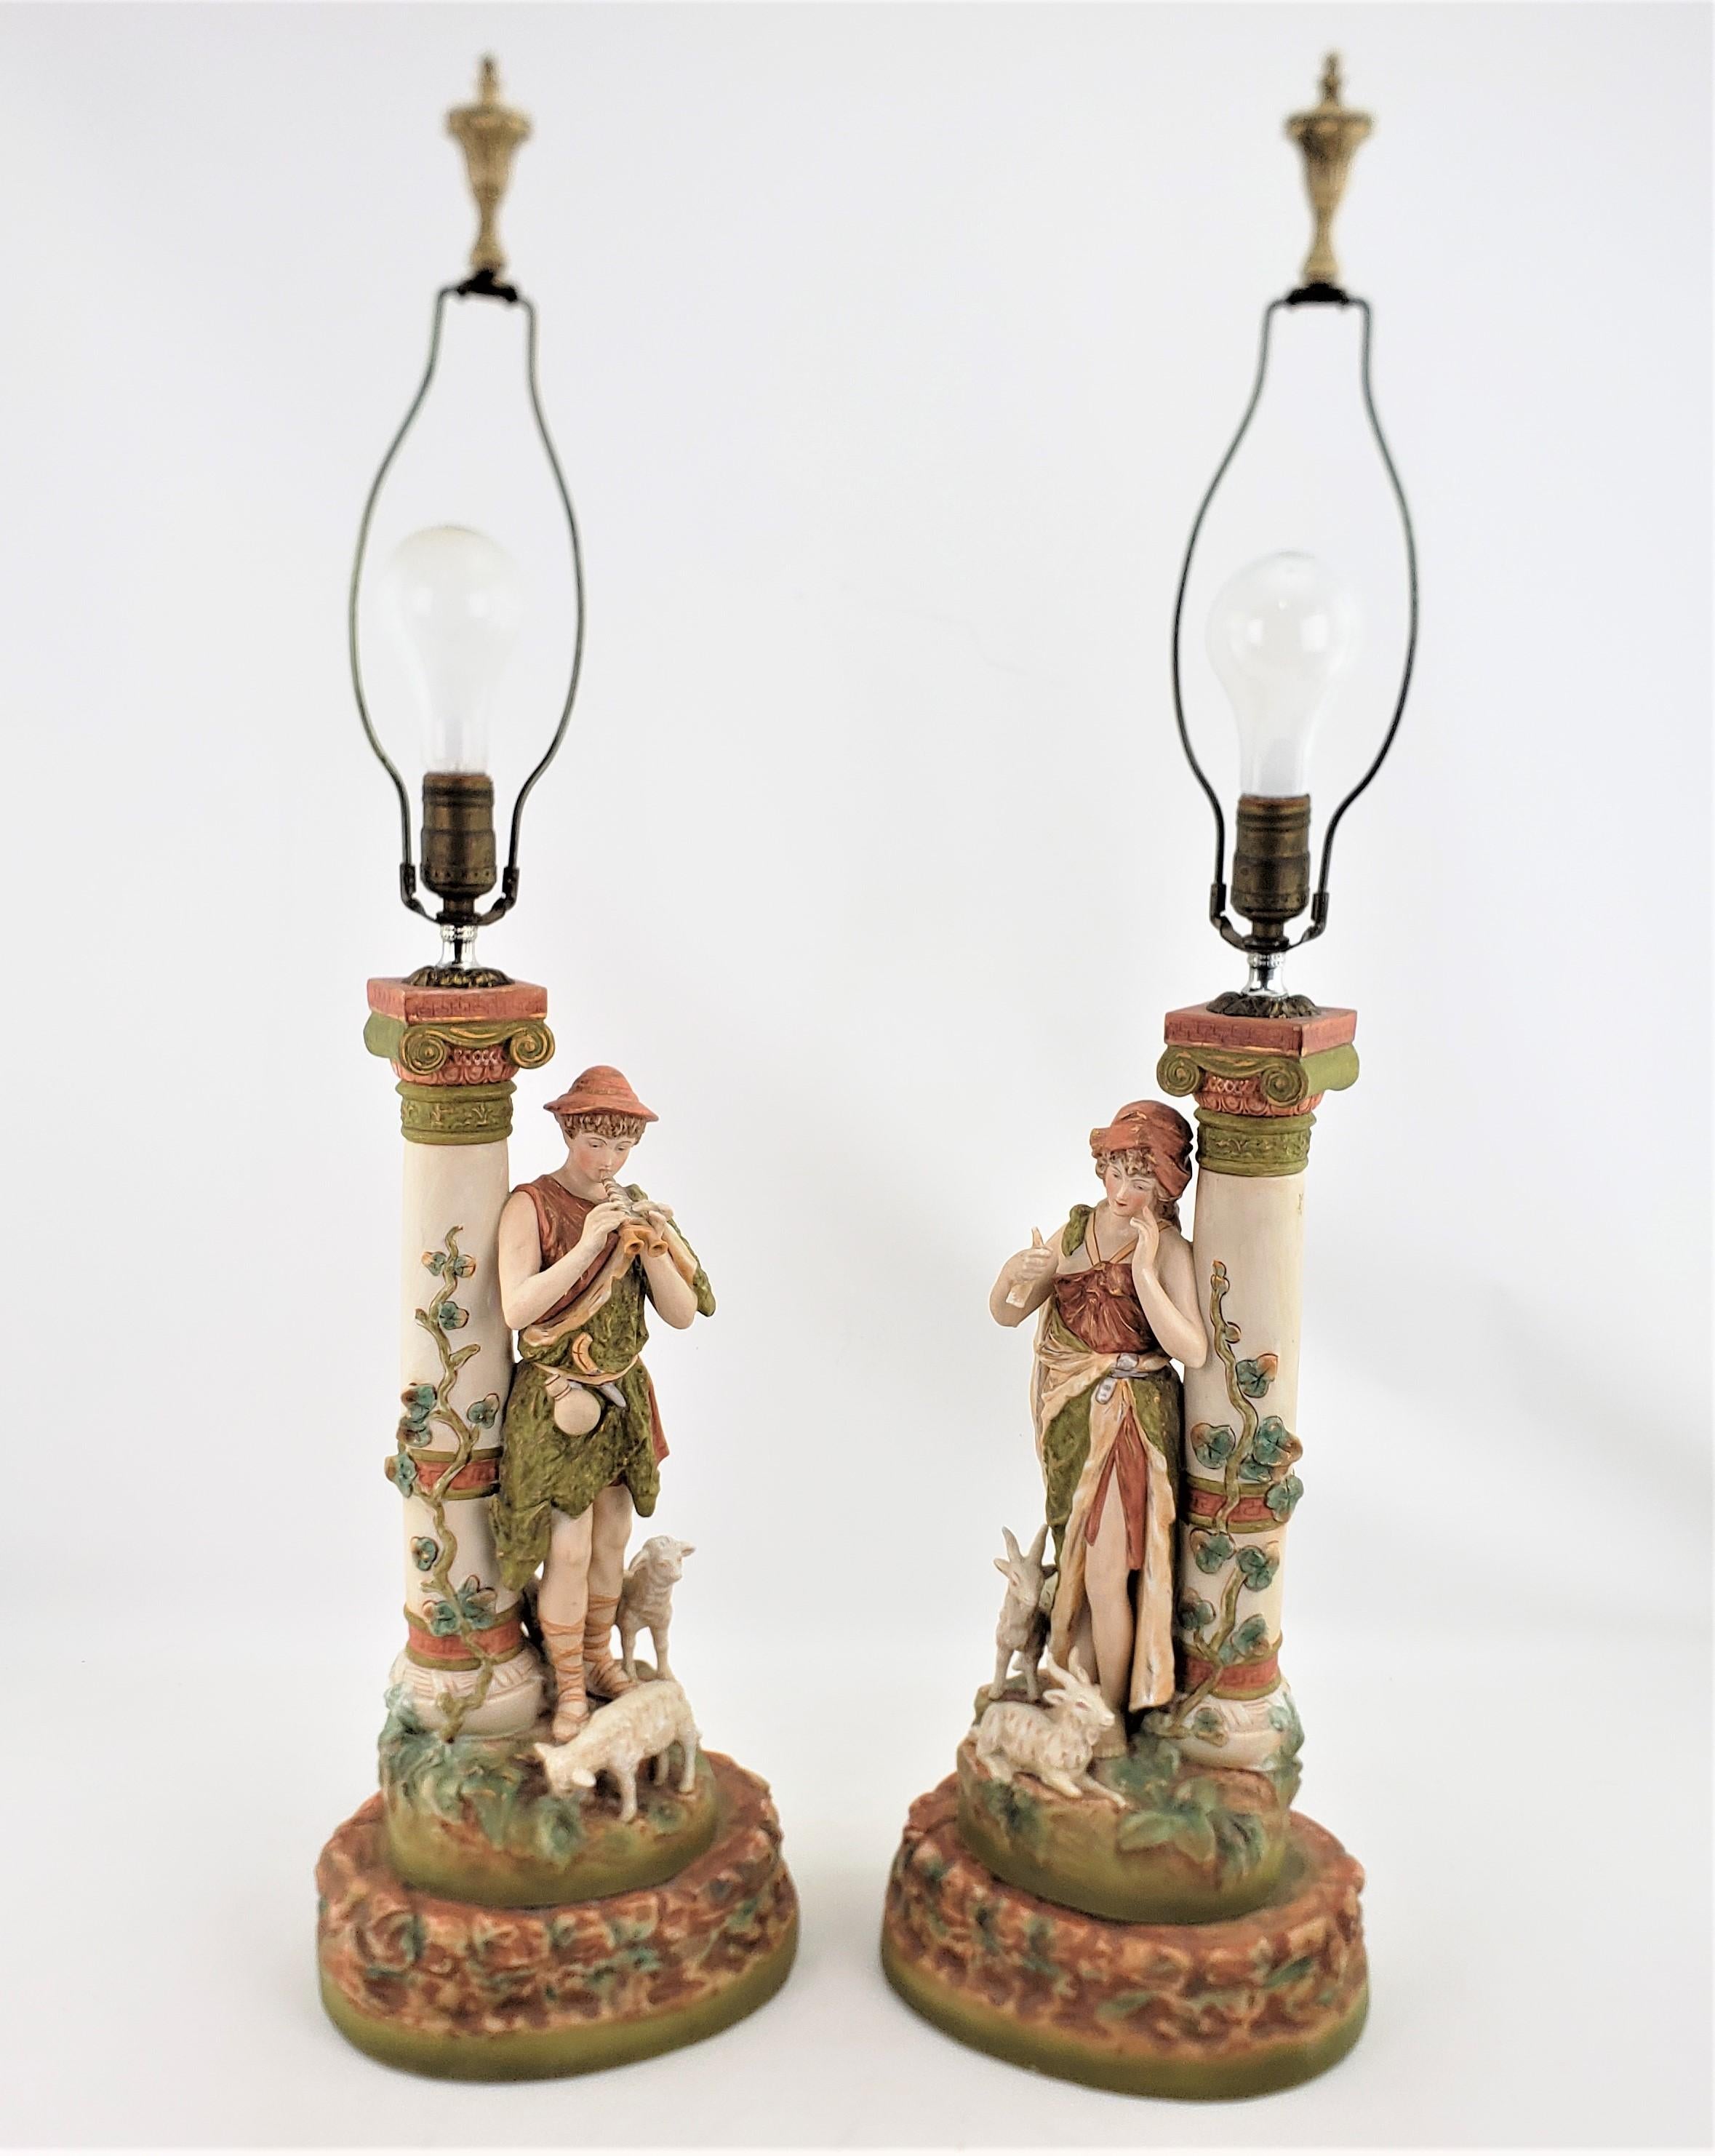 This large pair of antique porcelain lamps are unsigned, but being attributed to the Royal Dux factory of Bohemia, now the Czech Republic, in a Neoclassical Revival style. The detailed modelling and hand-painting we believe are highly consistent